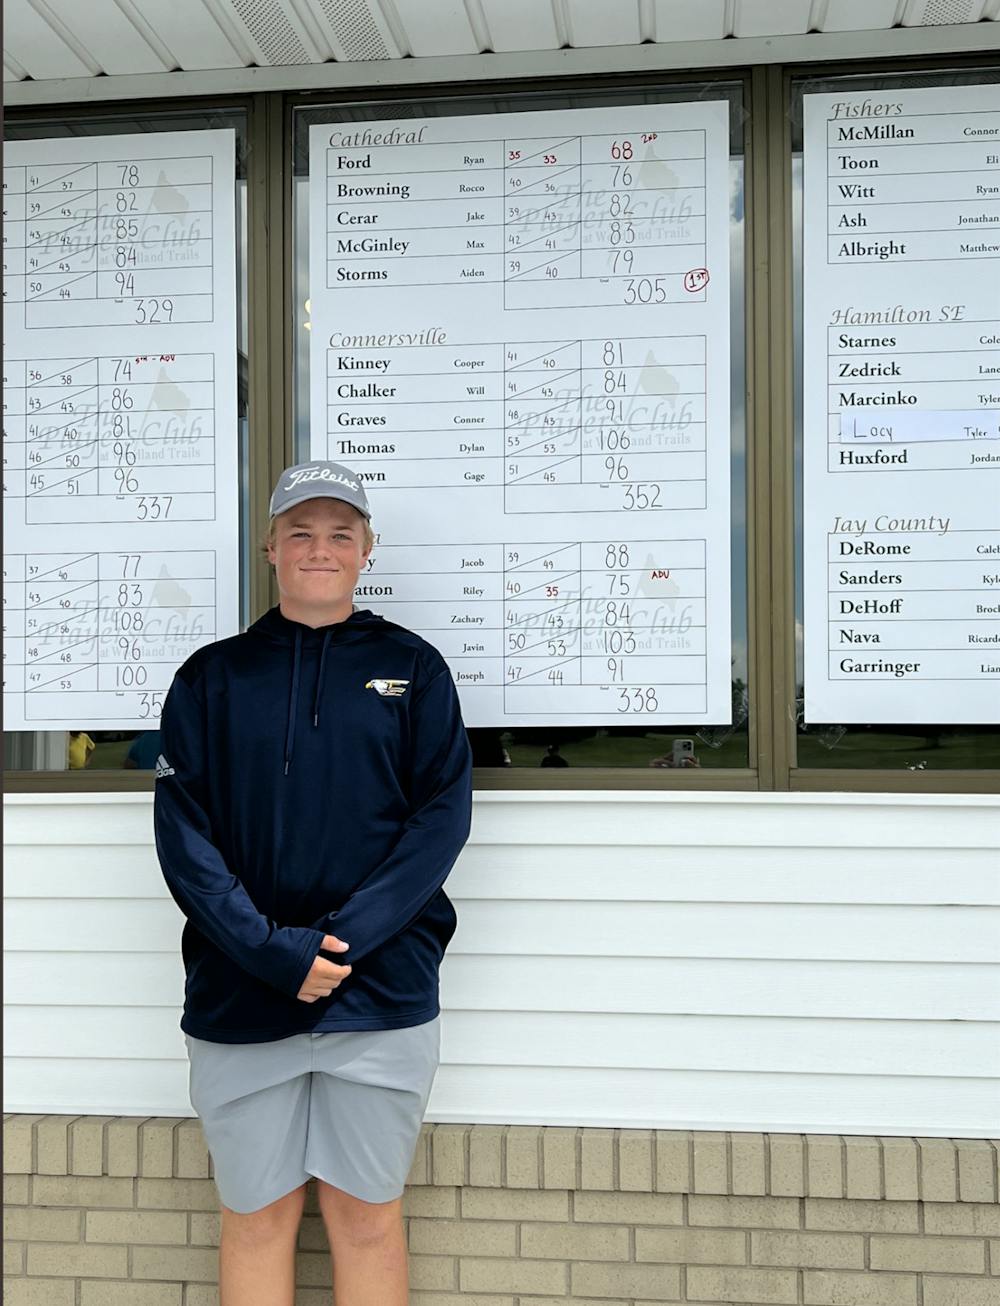 Delta's Riley Bratton shoots 88 on day 1 of Indiana Boys' Golf State Finals